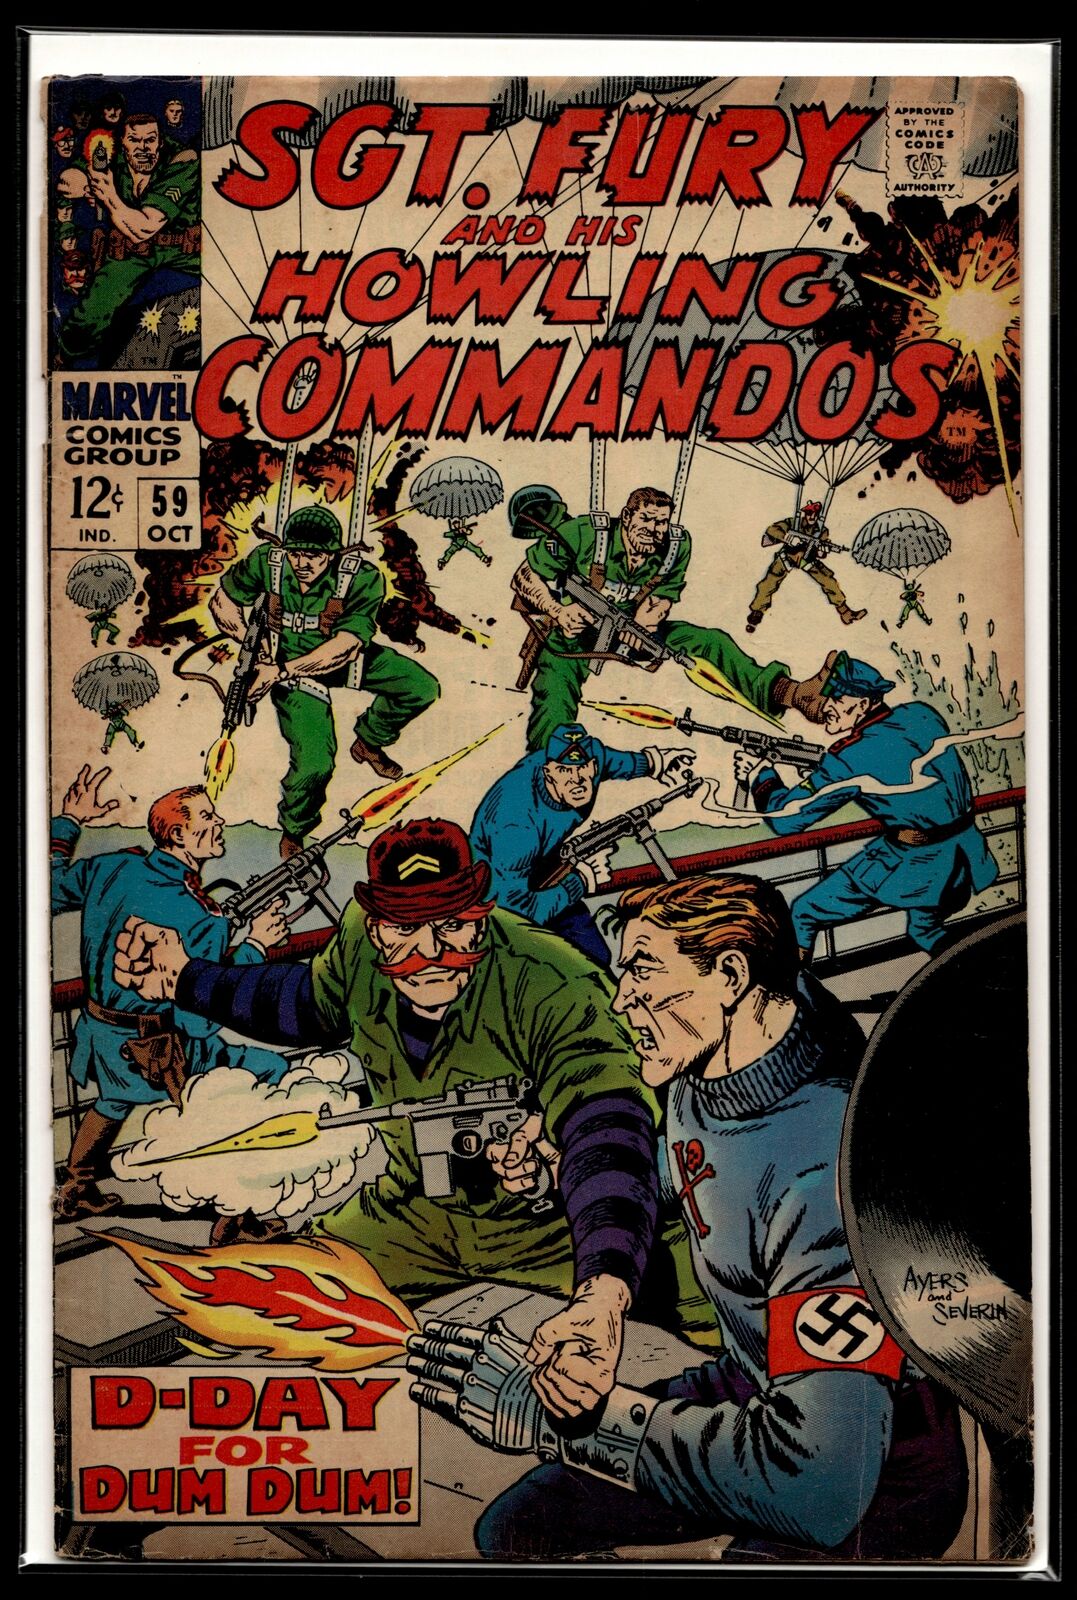 1968 Sgt. Fury and His Howling Commandos #59 Marvel Comic